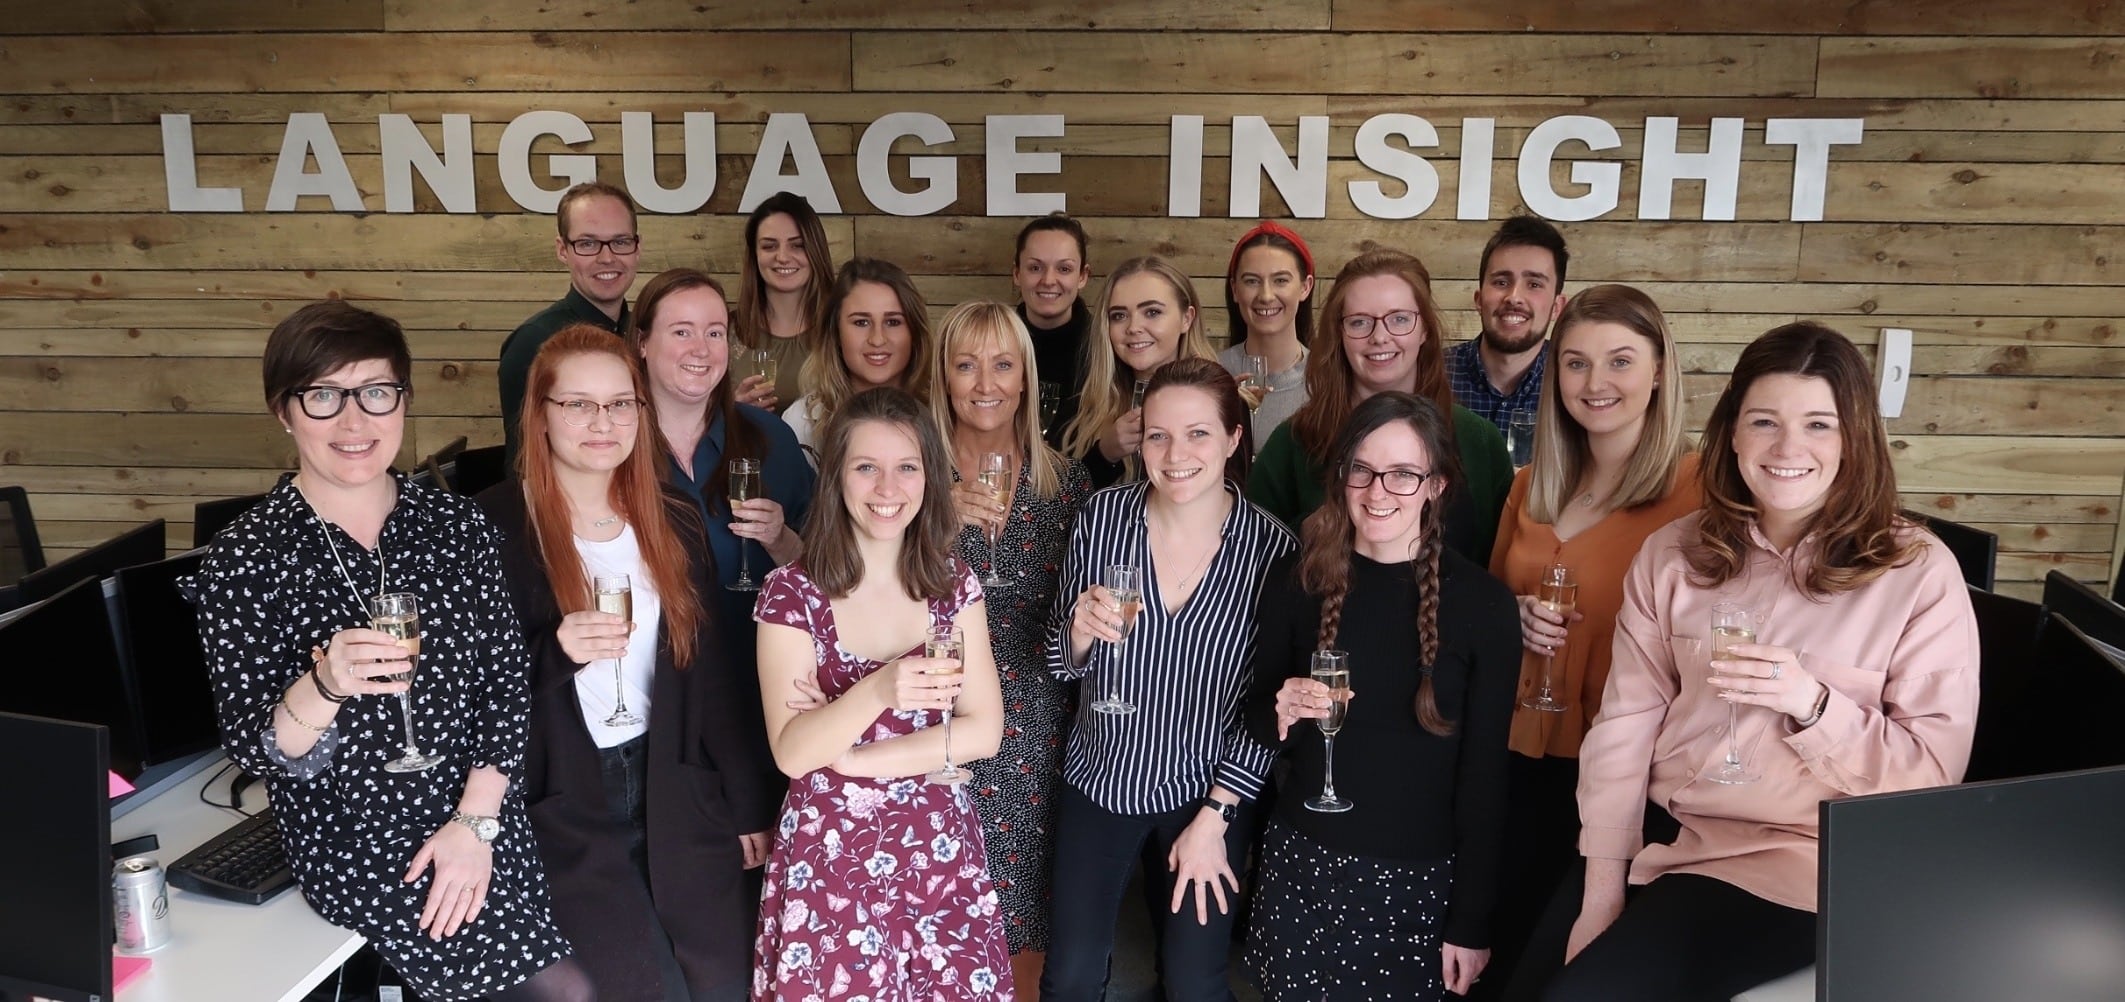  Language Insight team celebrating Language Insight's win of The Queen's Award 2019